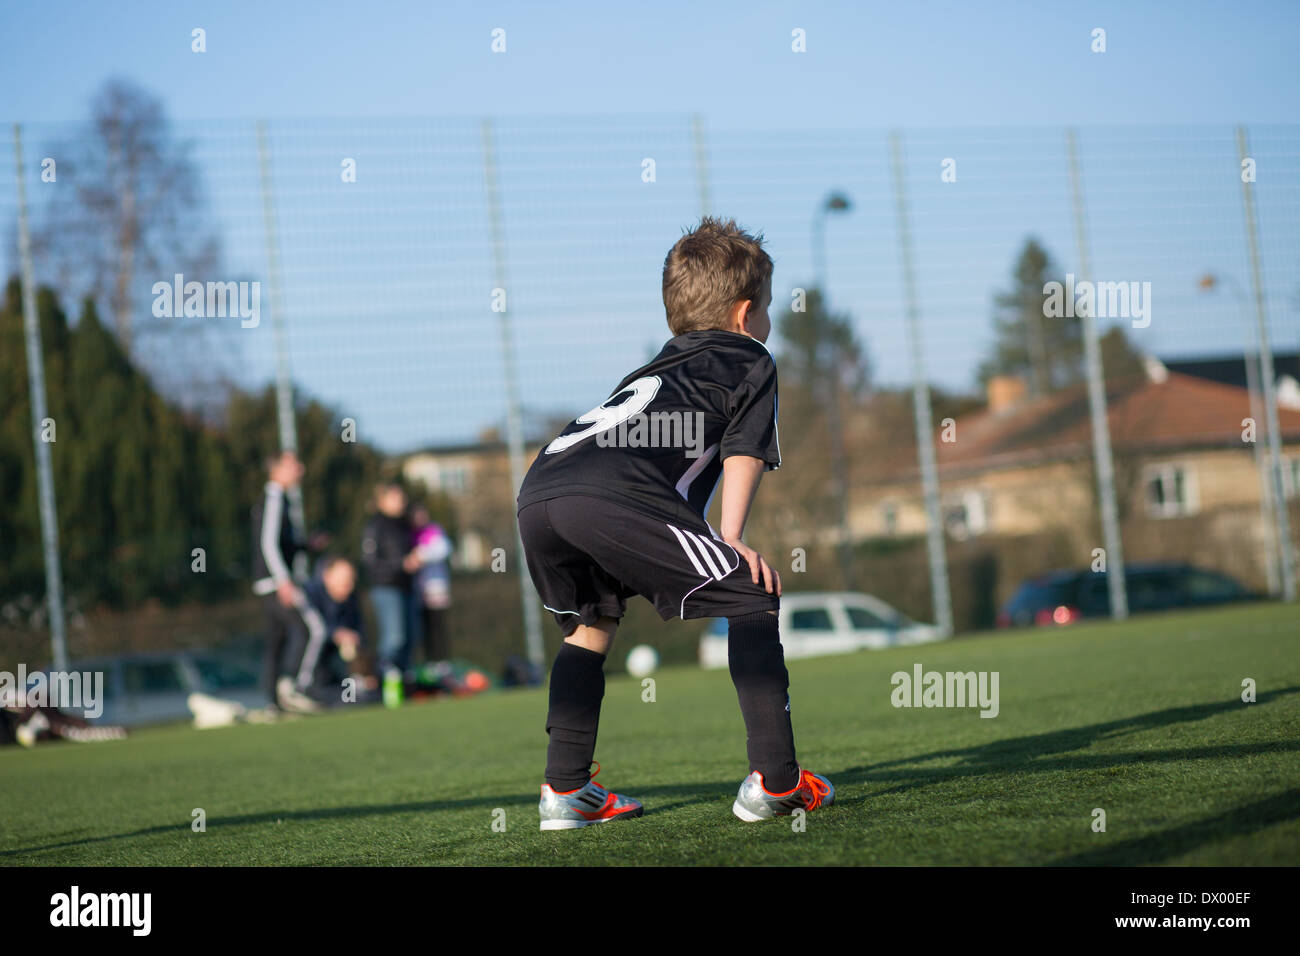 Young soccer player taking a rest during a soccer match. Trademarks have been removed. Stock Photo